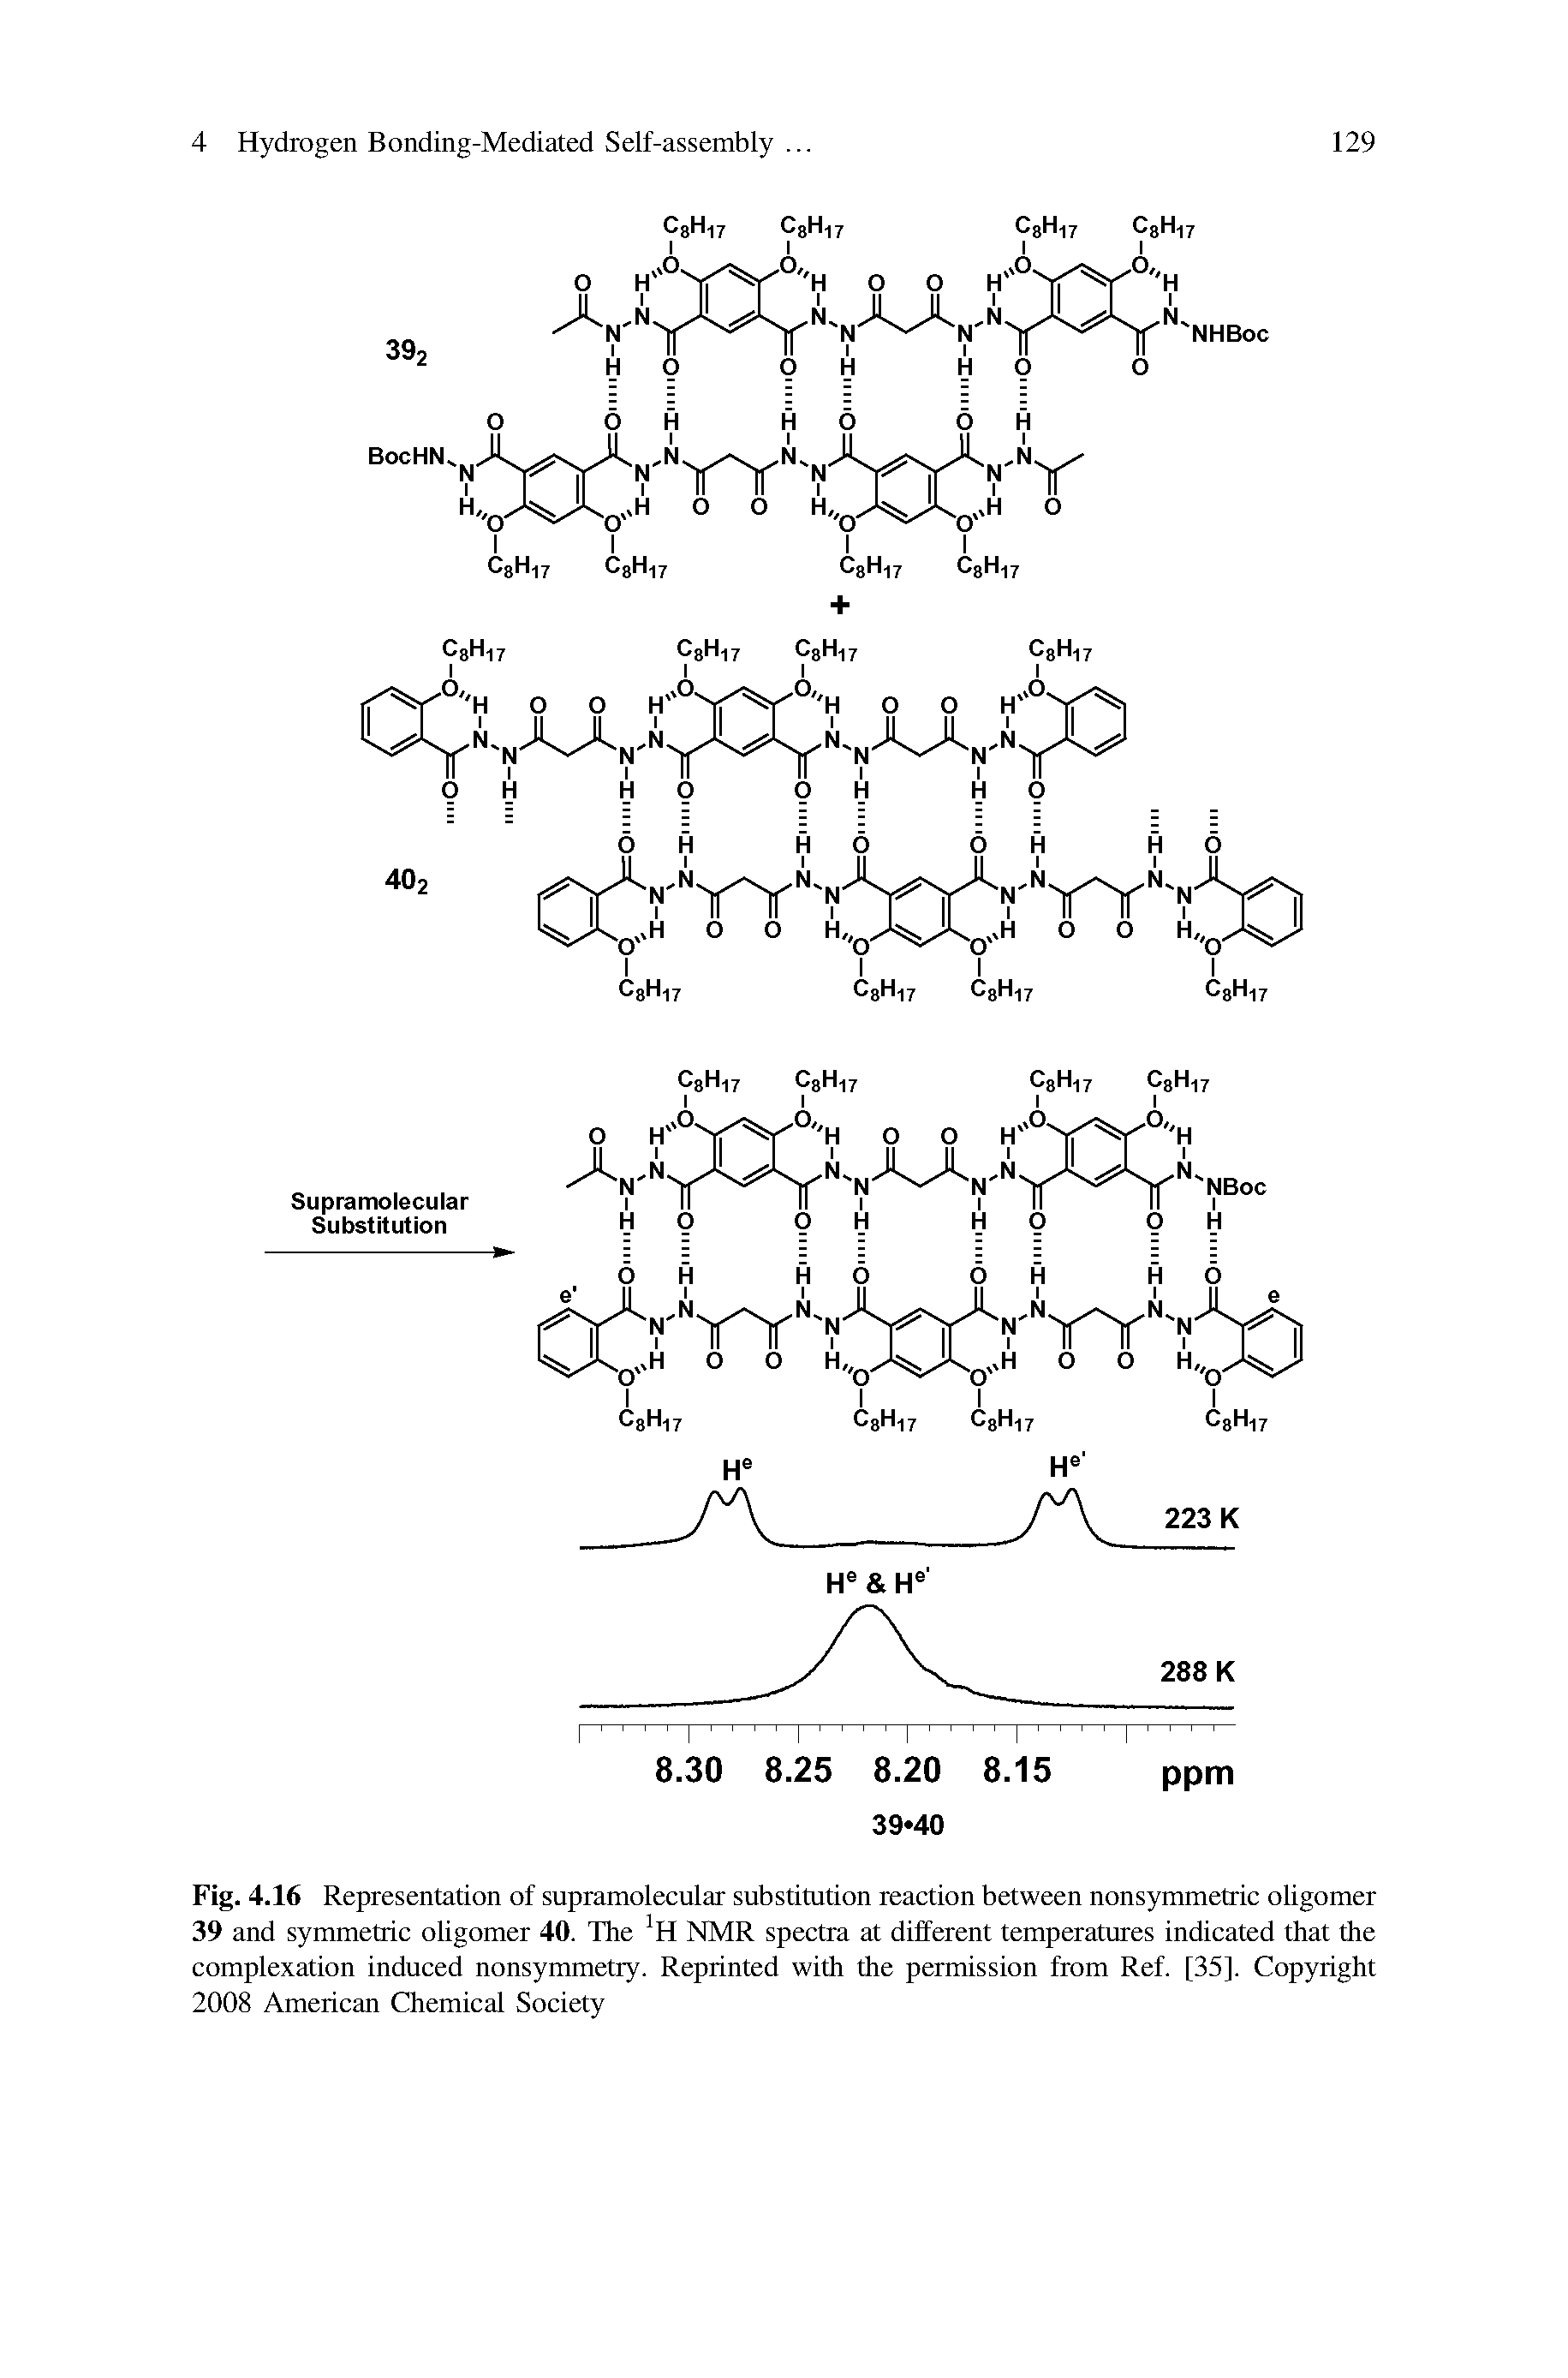 Fig. 4.16 Representation of supramolecular substitution reaction between nonsymmetric oligomer 39 and symmetric oligomer 40. The H NMR spectra at different temperatures indicated that the complexation induced nonsymmetry. Reprinted with the permission from Ref. [35]. Copyright 2008 American Chemical Society...